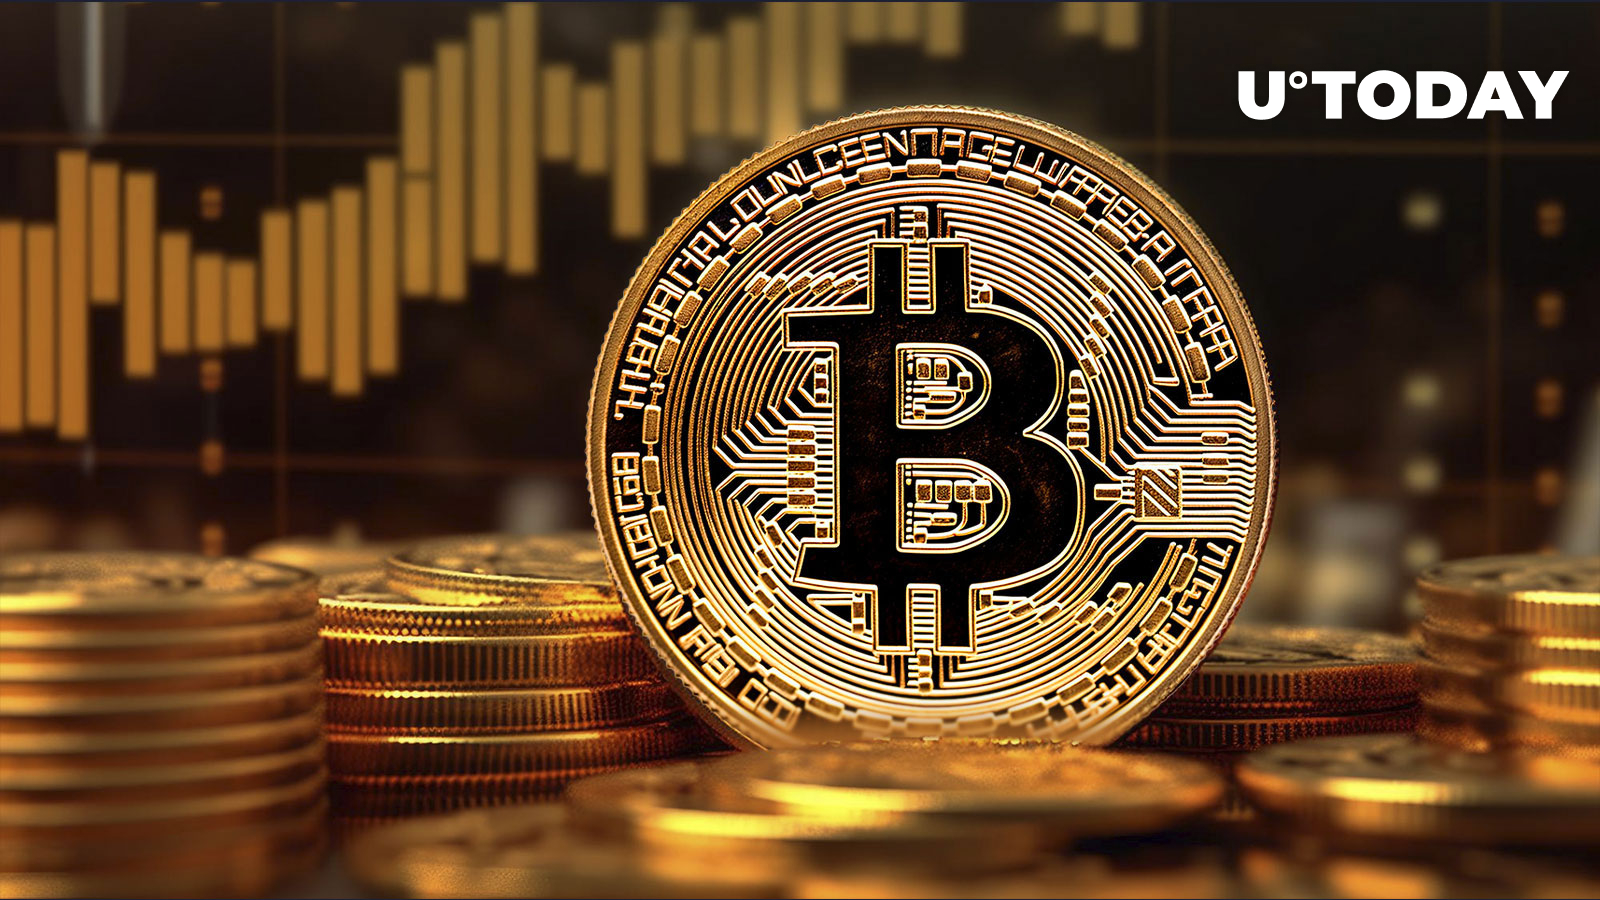 Bitcoin (BTC) Price Could Recover Losses Quickly, Trader Predicts